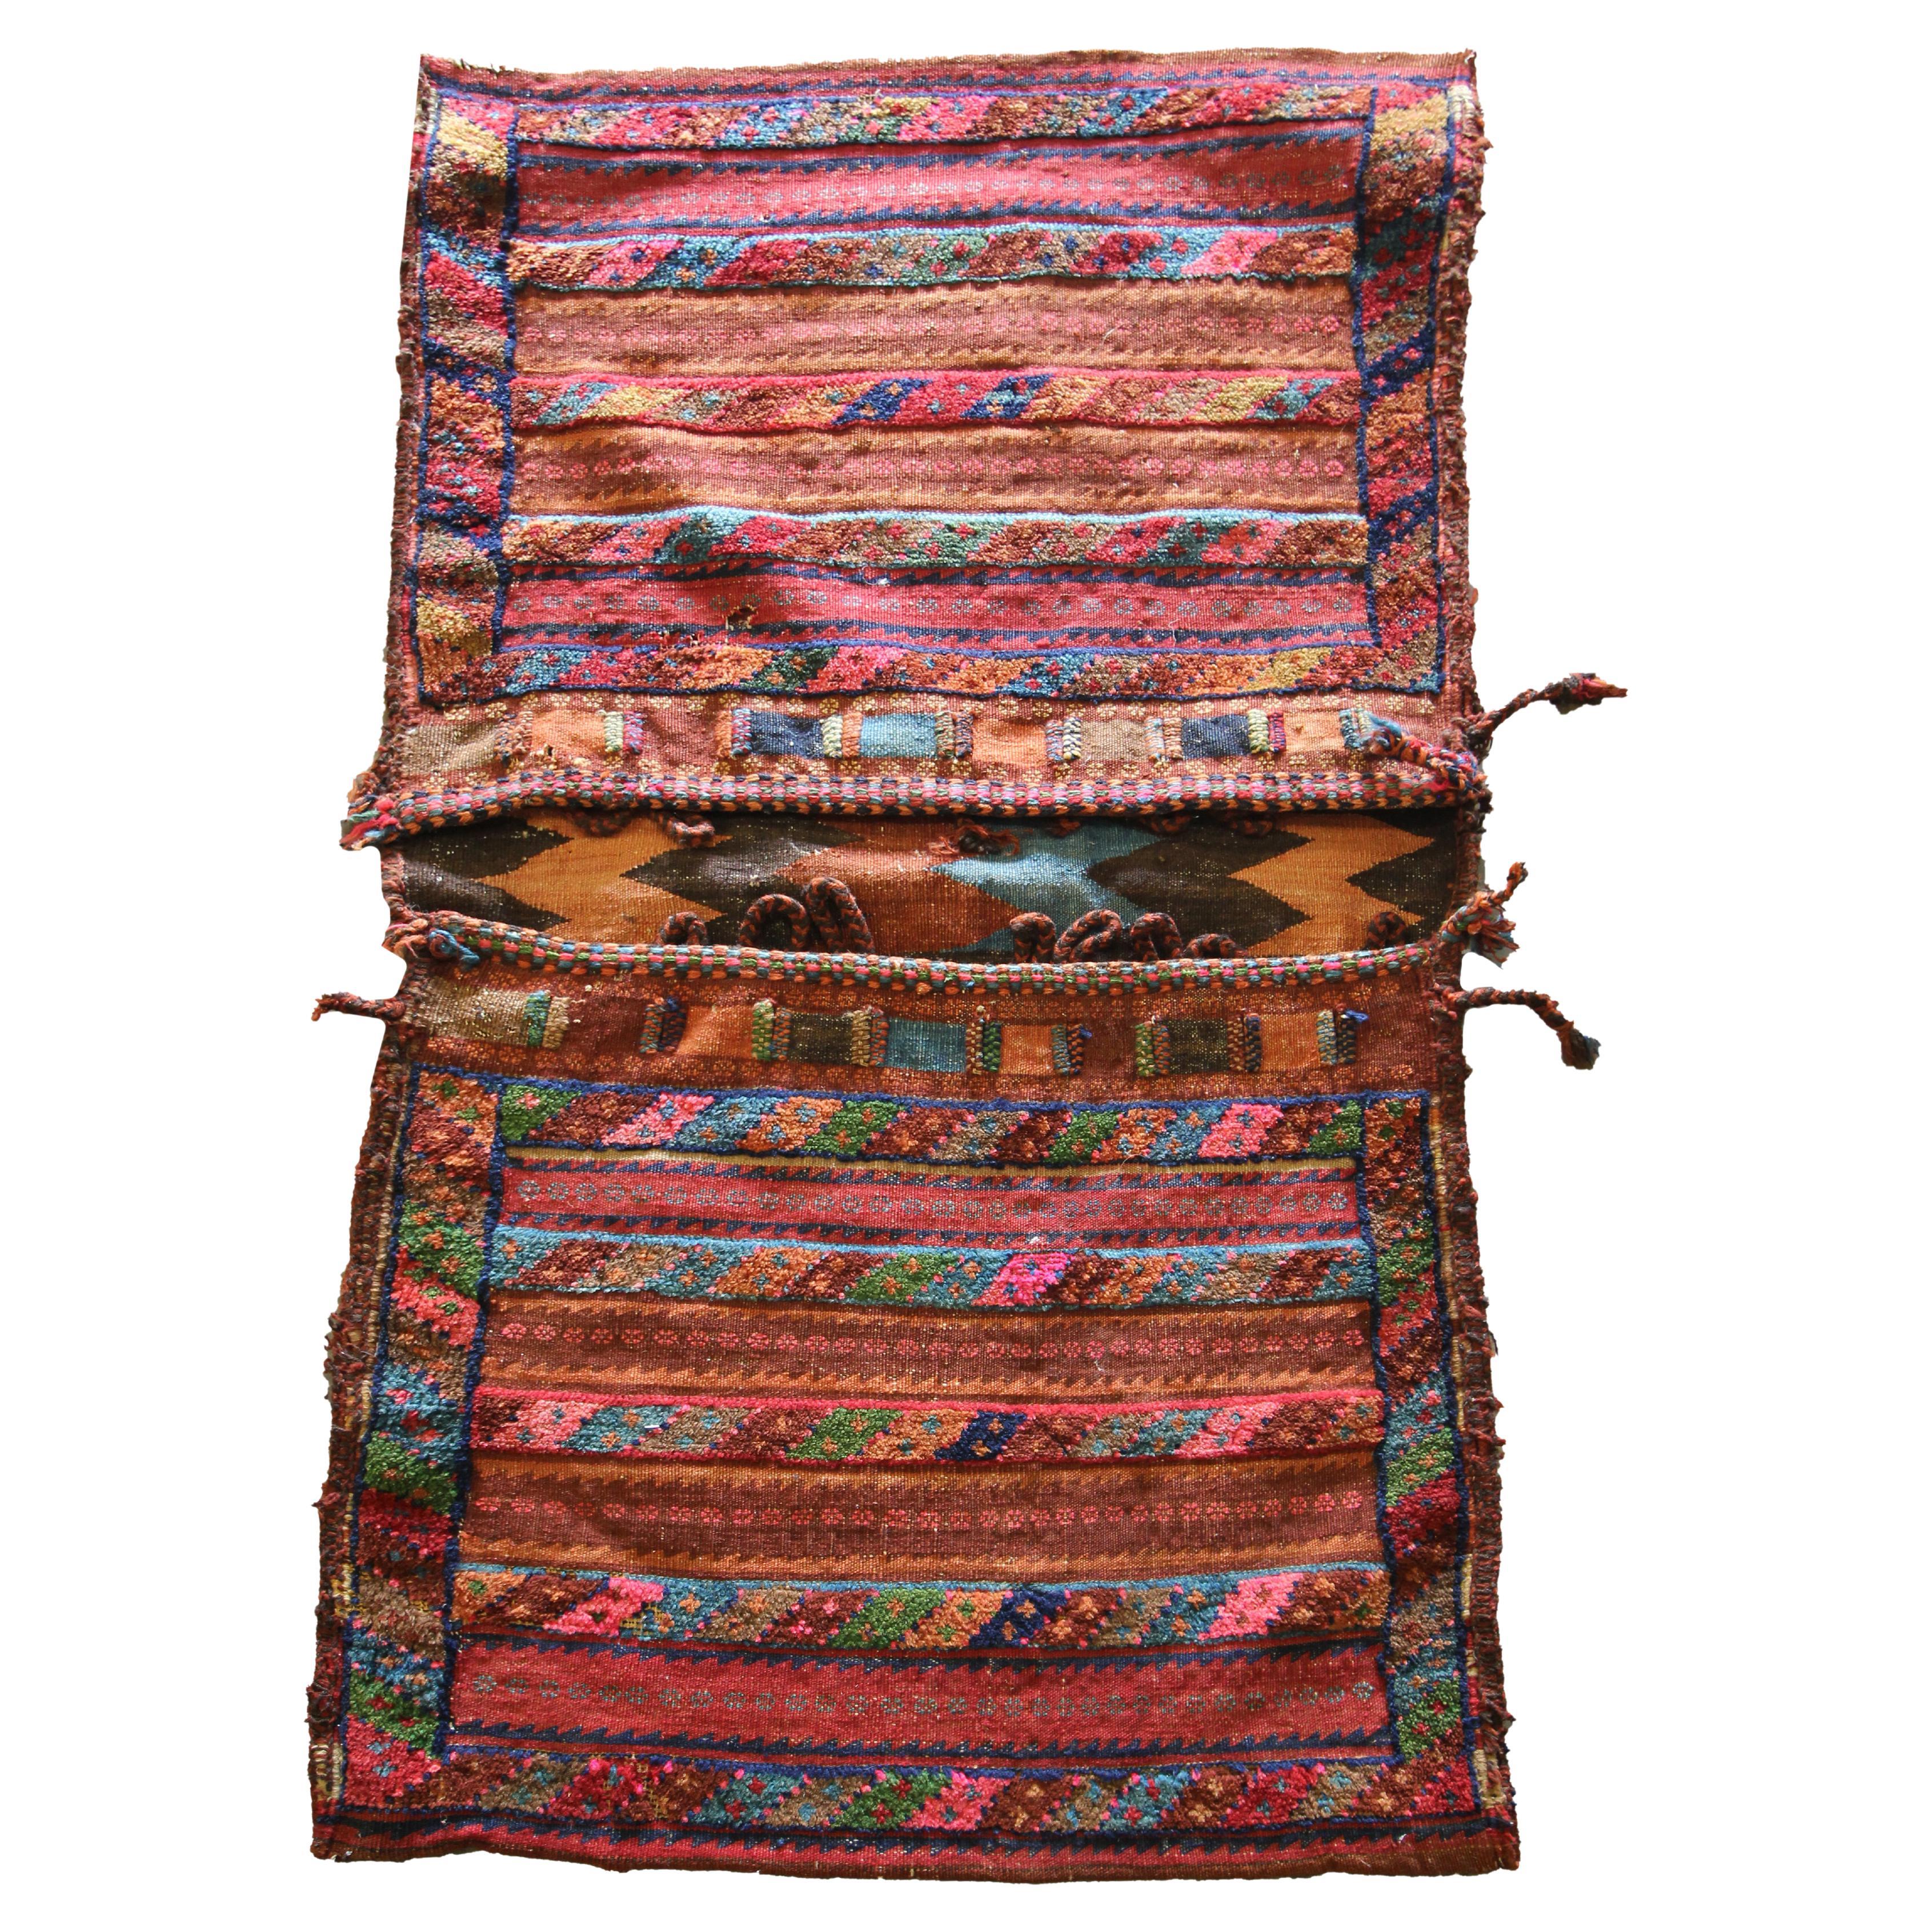 Traditional Tribal Rug Textile Handwoven Antique Oriental Wool Saddle Bag For Sale